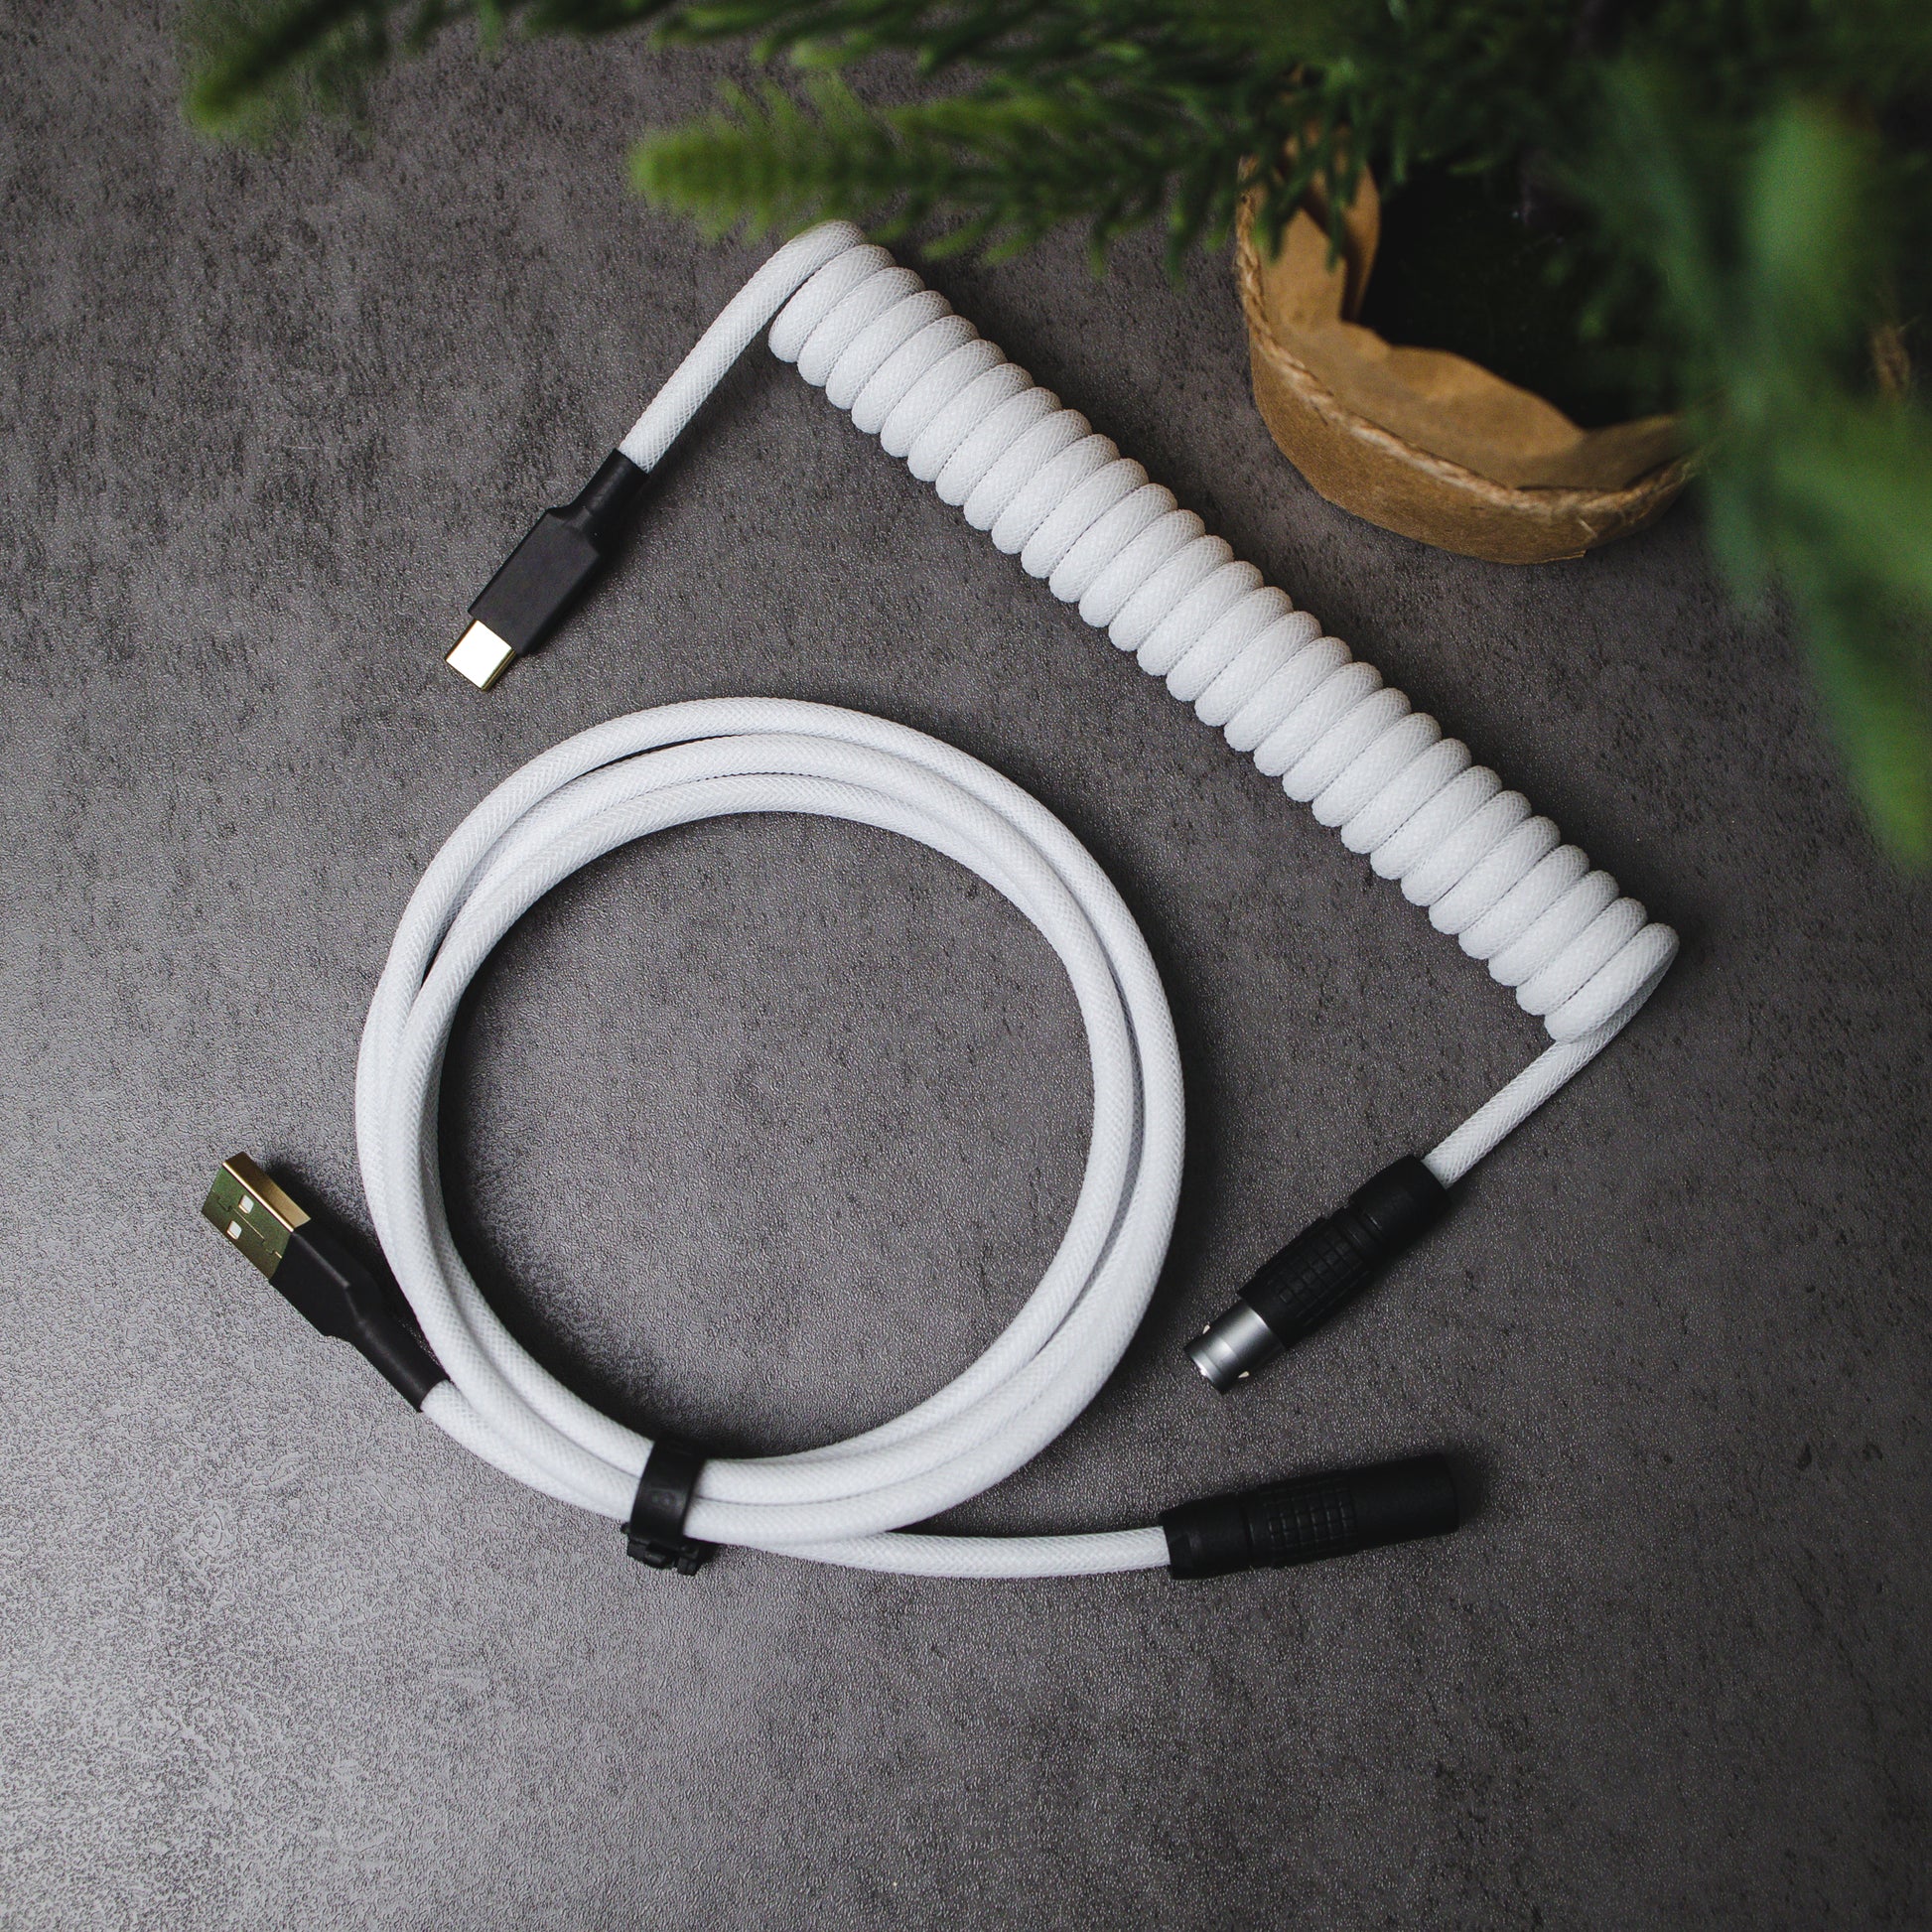 Birds eye view of white and black coiled mechanical keyboard cable. Teleios Polar White sleeving, white TechFlex, black heat-shrink tubing, gold USB A and USB C connectors, black sandblasted FEMO 1B push/pull connector.